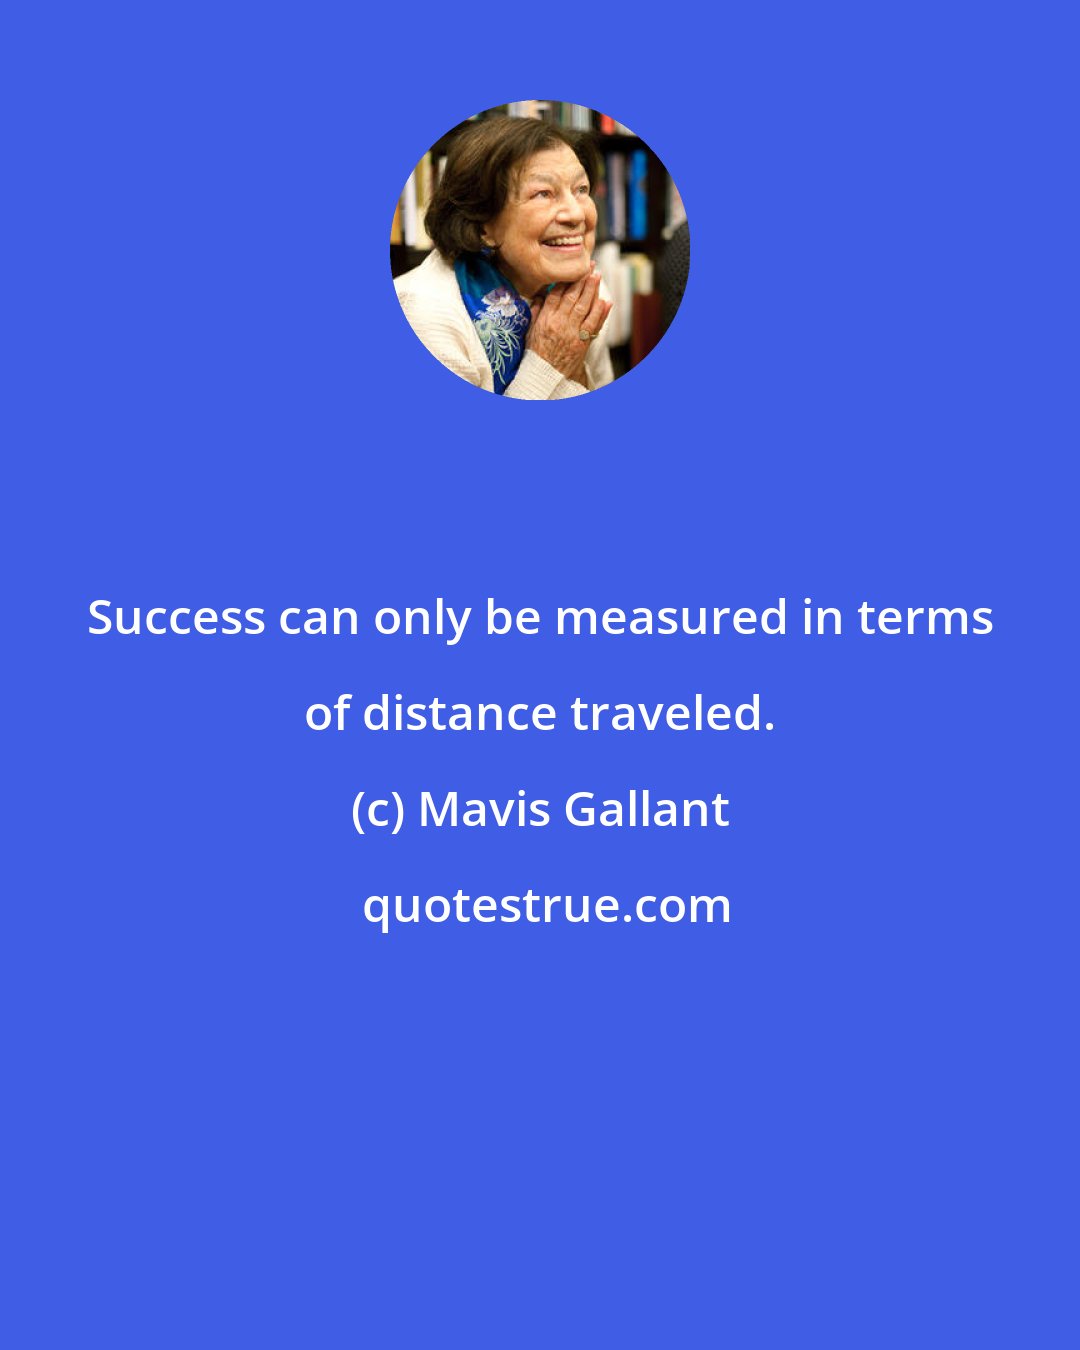 Mavis Gallant: Success can only be measured in terms of distance traveled.